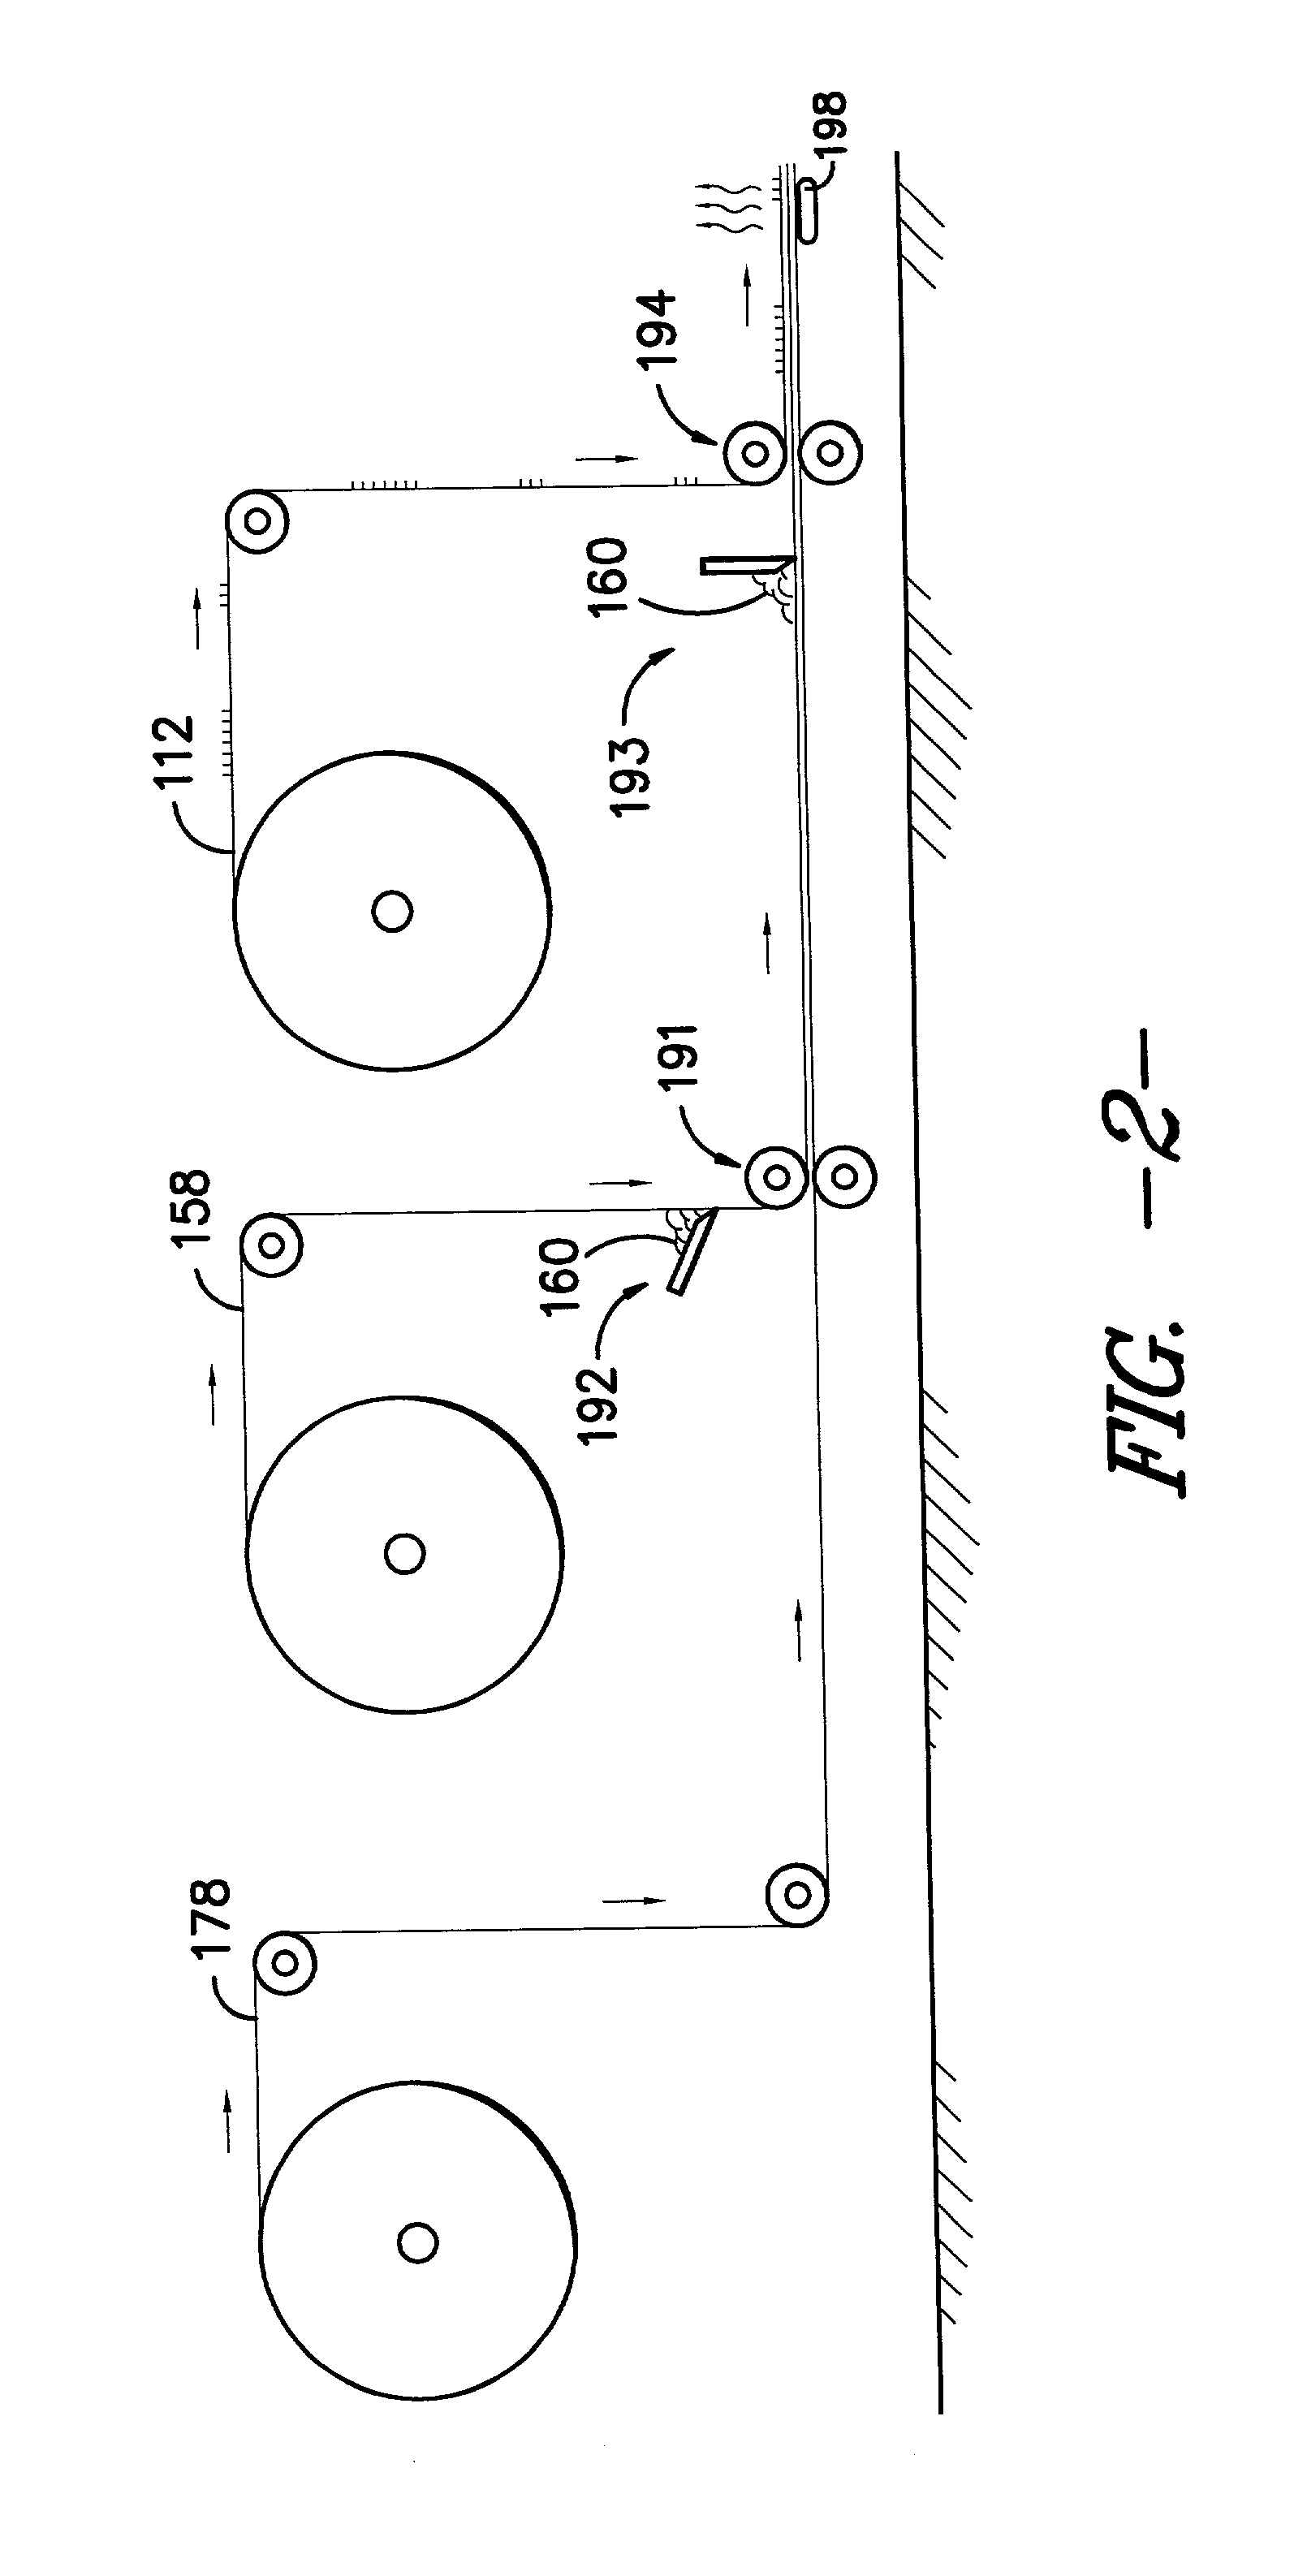 Textile product and method